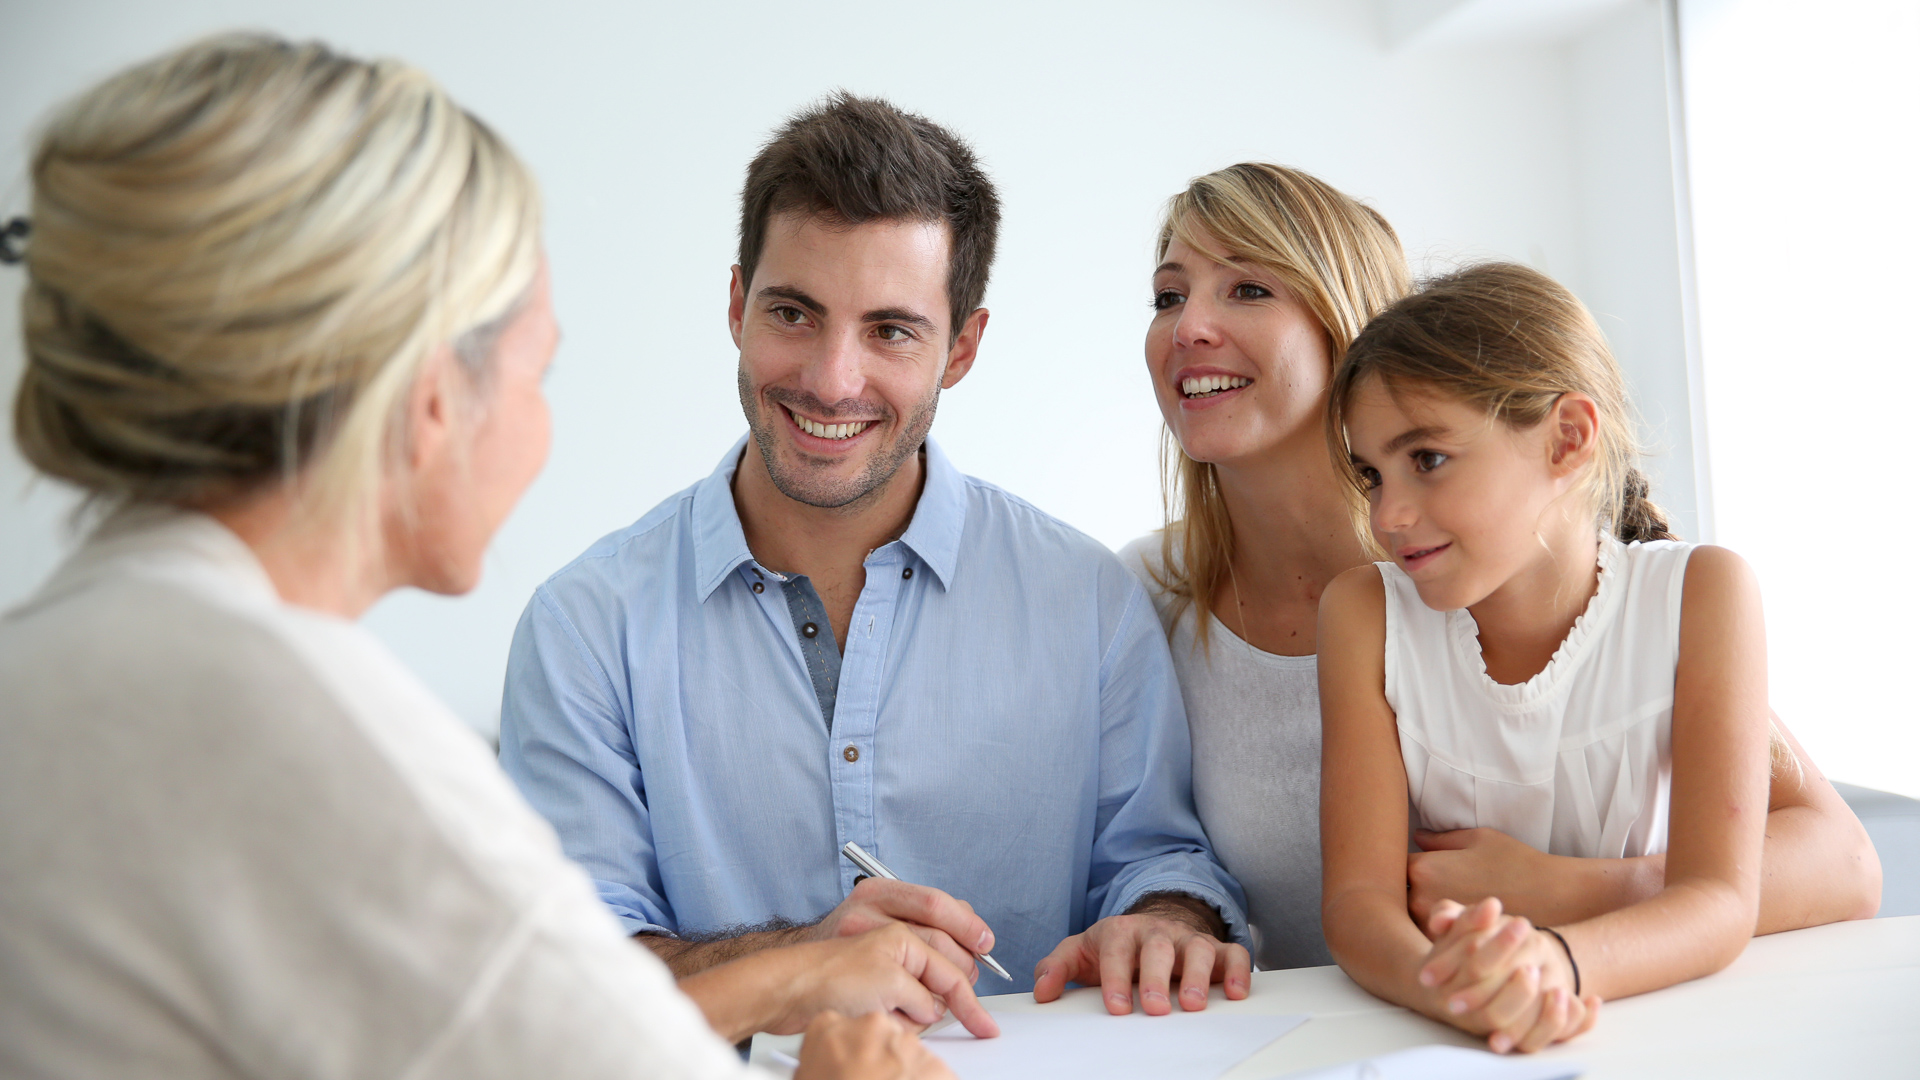 How to talk to mortgage lenders